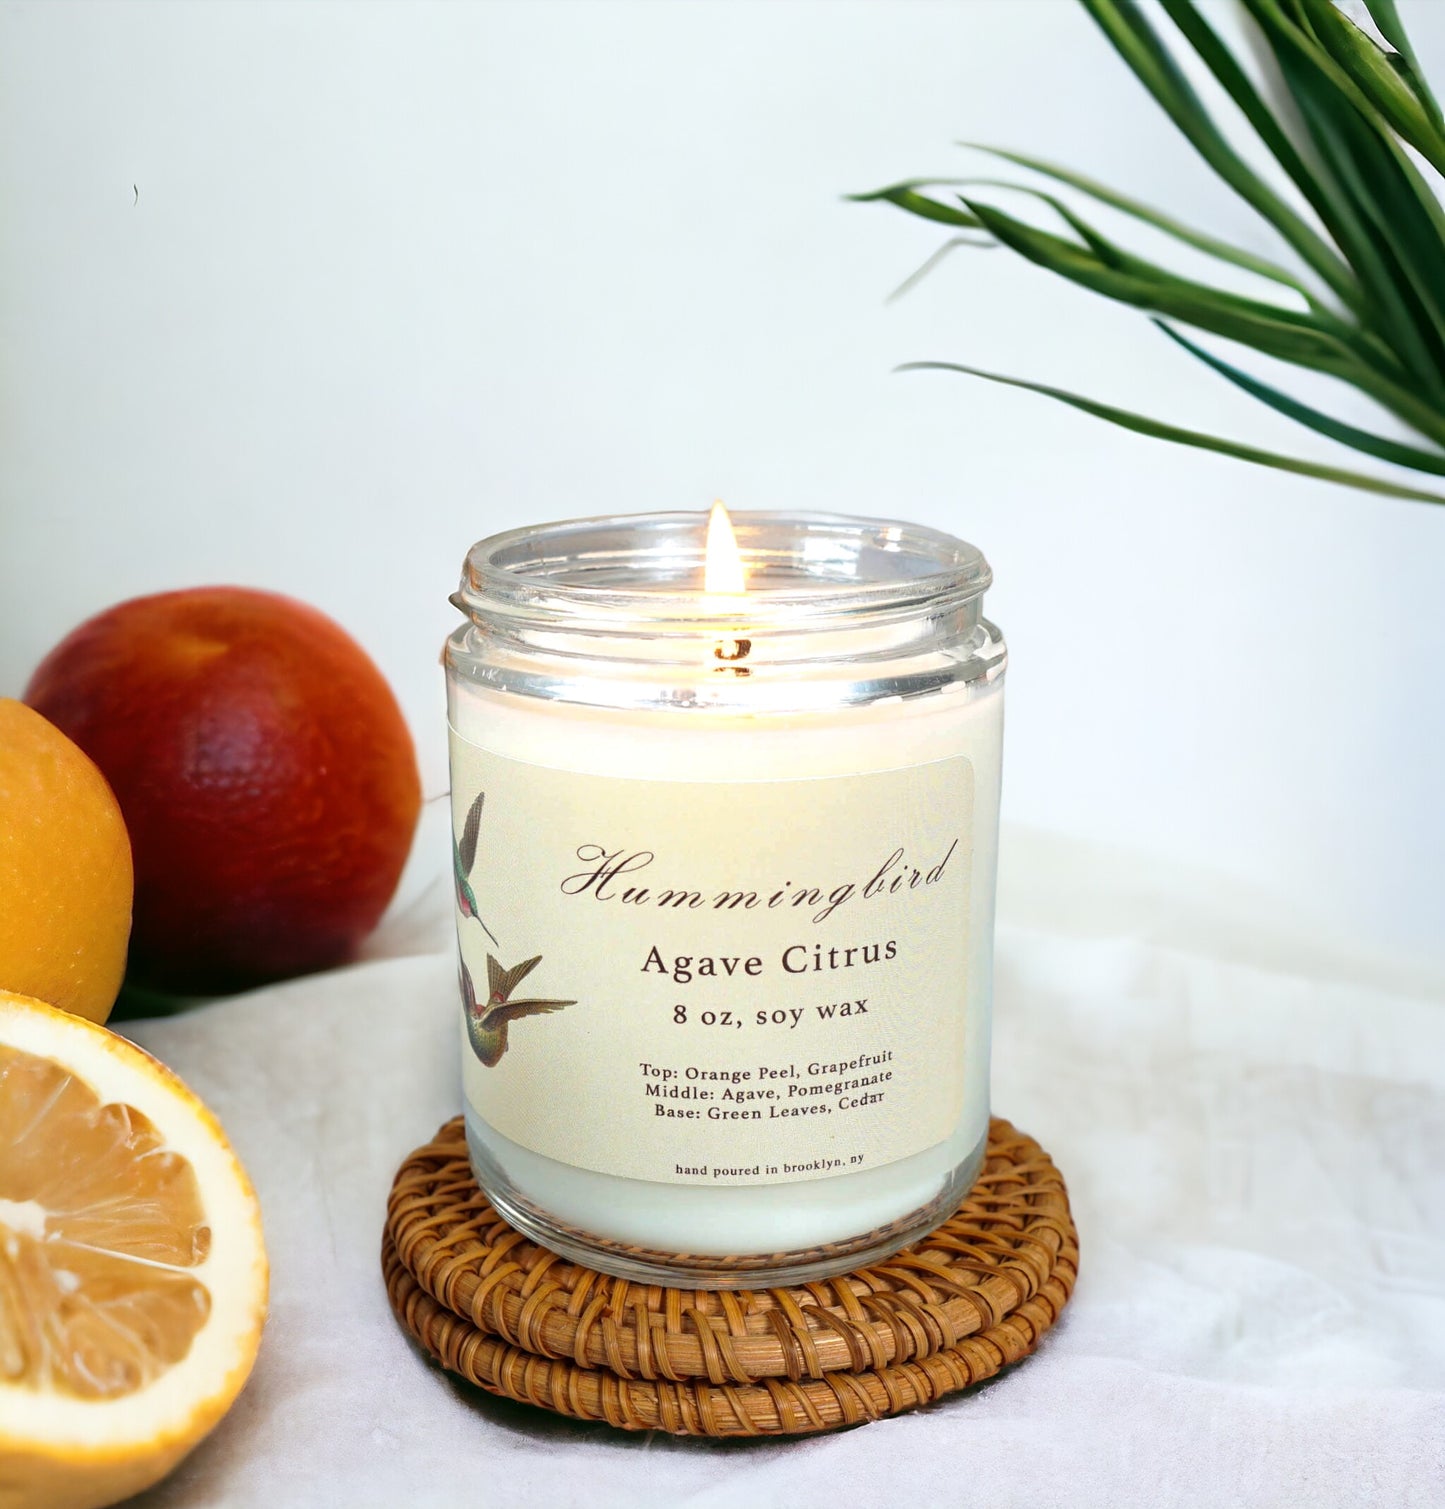 Hummingbird: Agave Citrus Scented Candle